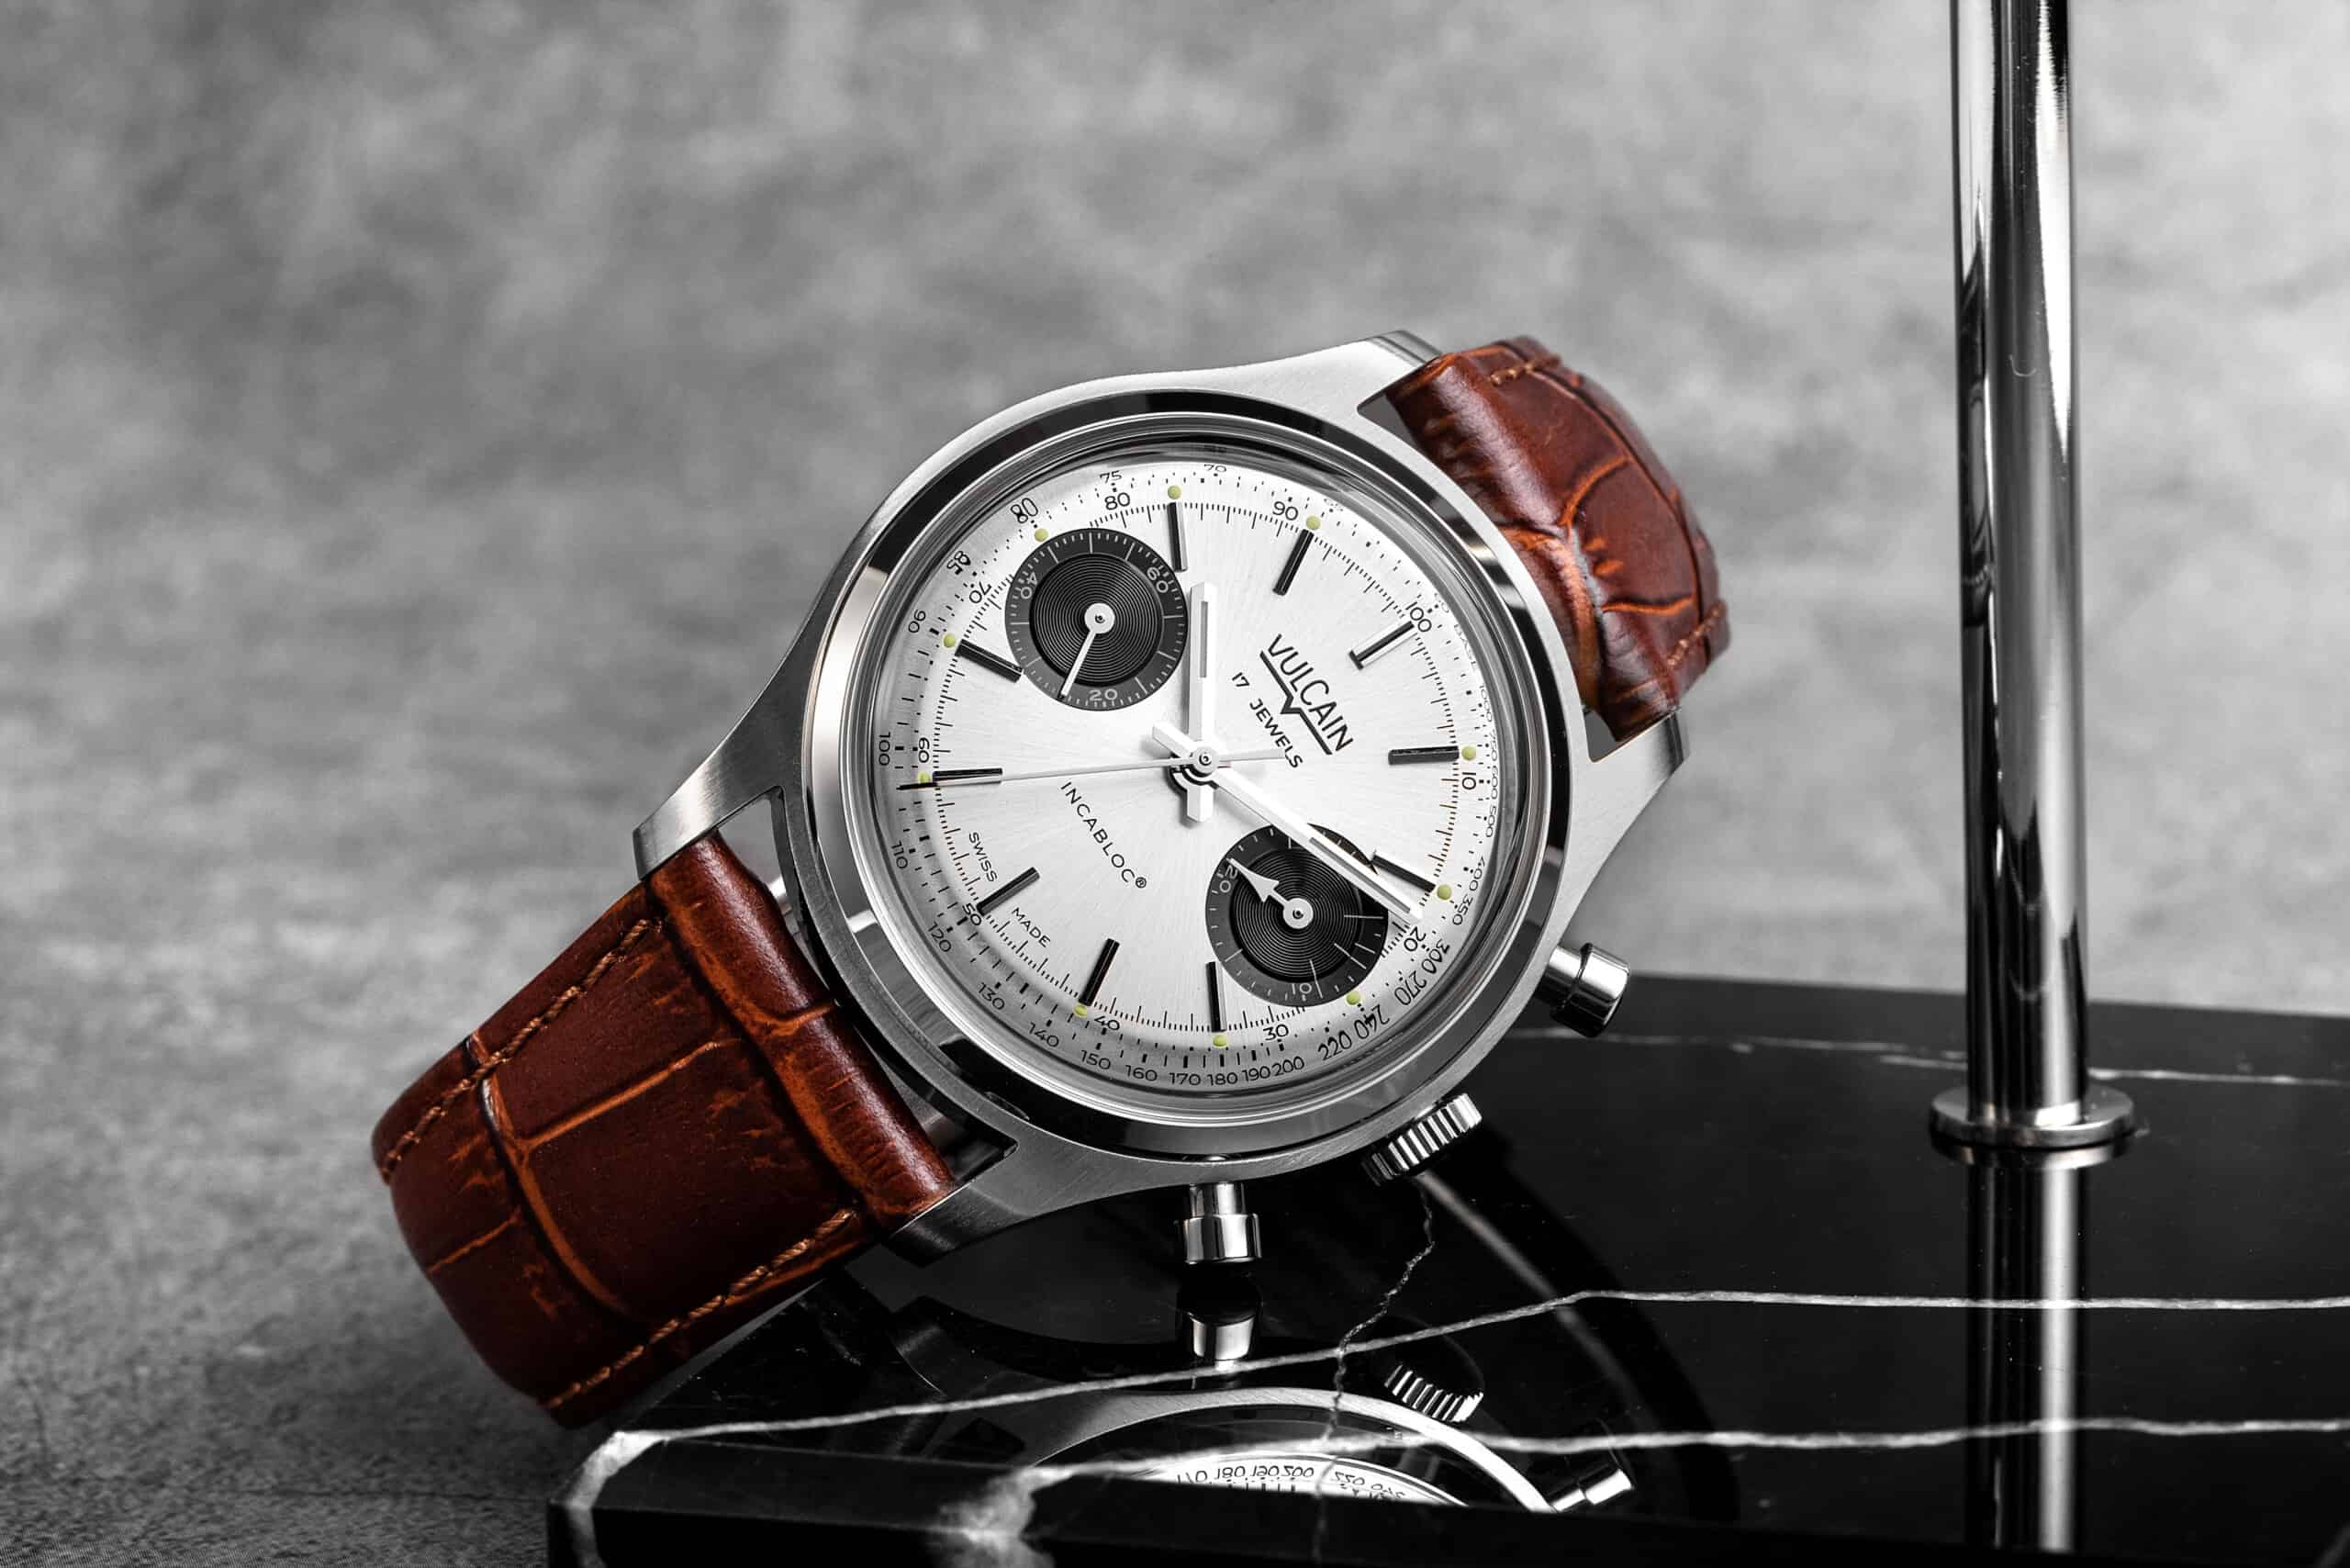 Vulcain Knows How to Play The Hits and the Chrongraphe 1970’s is their Latest Vintage Tune